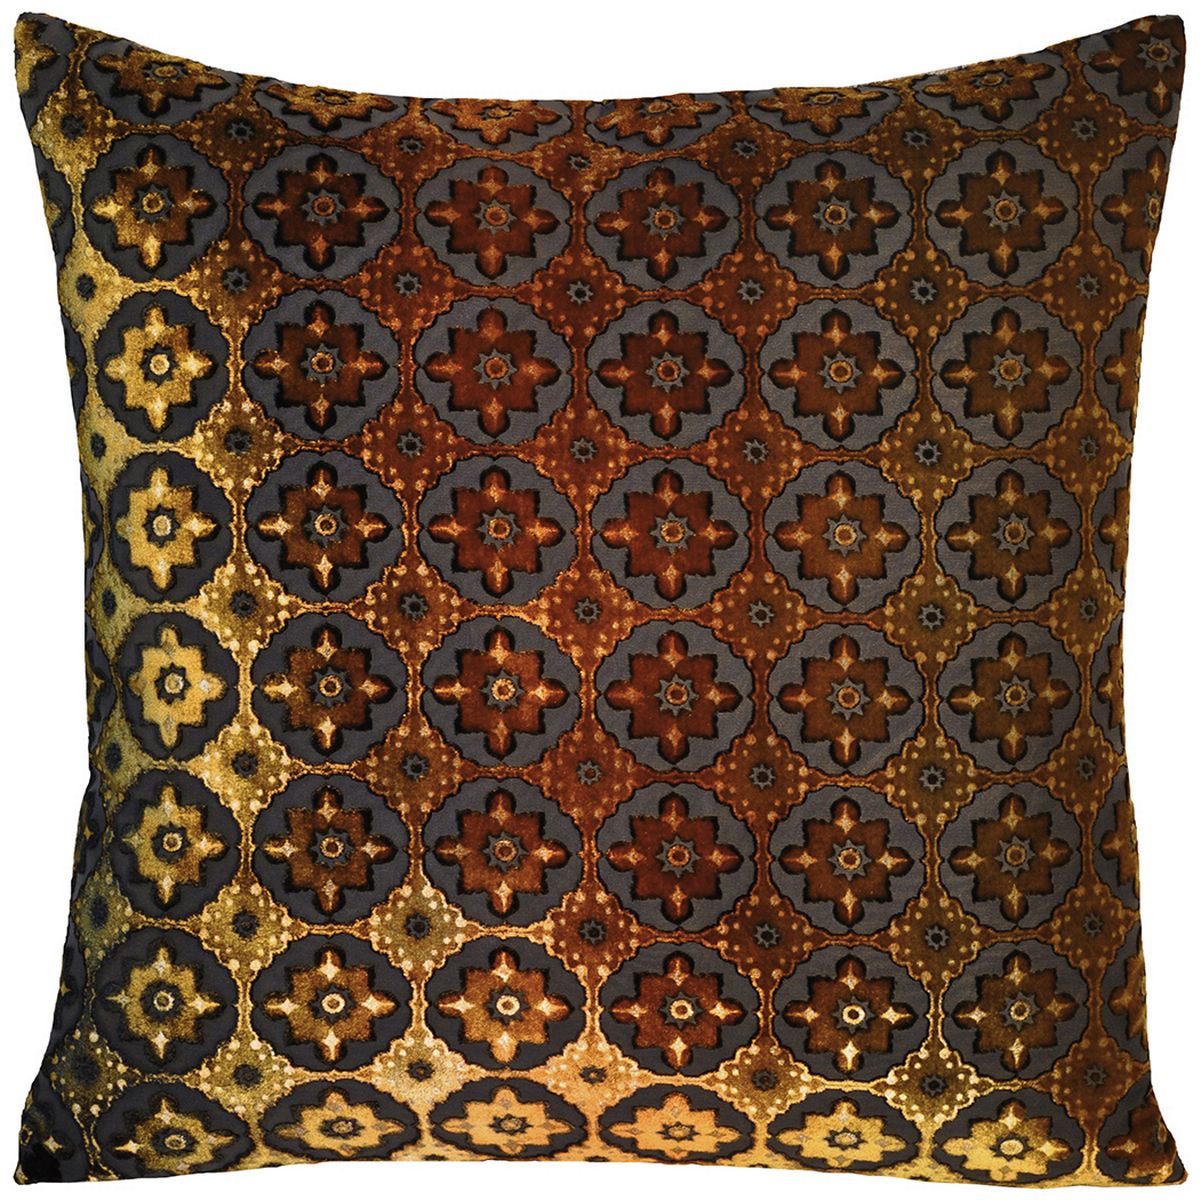 Small Moroccan Velvet Dec Pillows by Kevin O'Brien